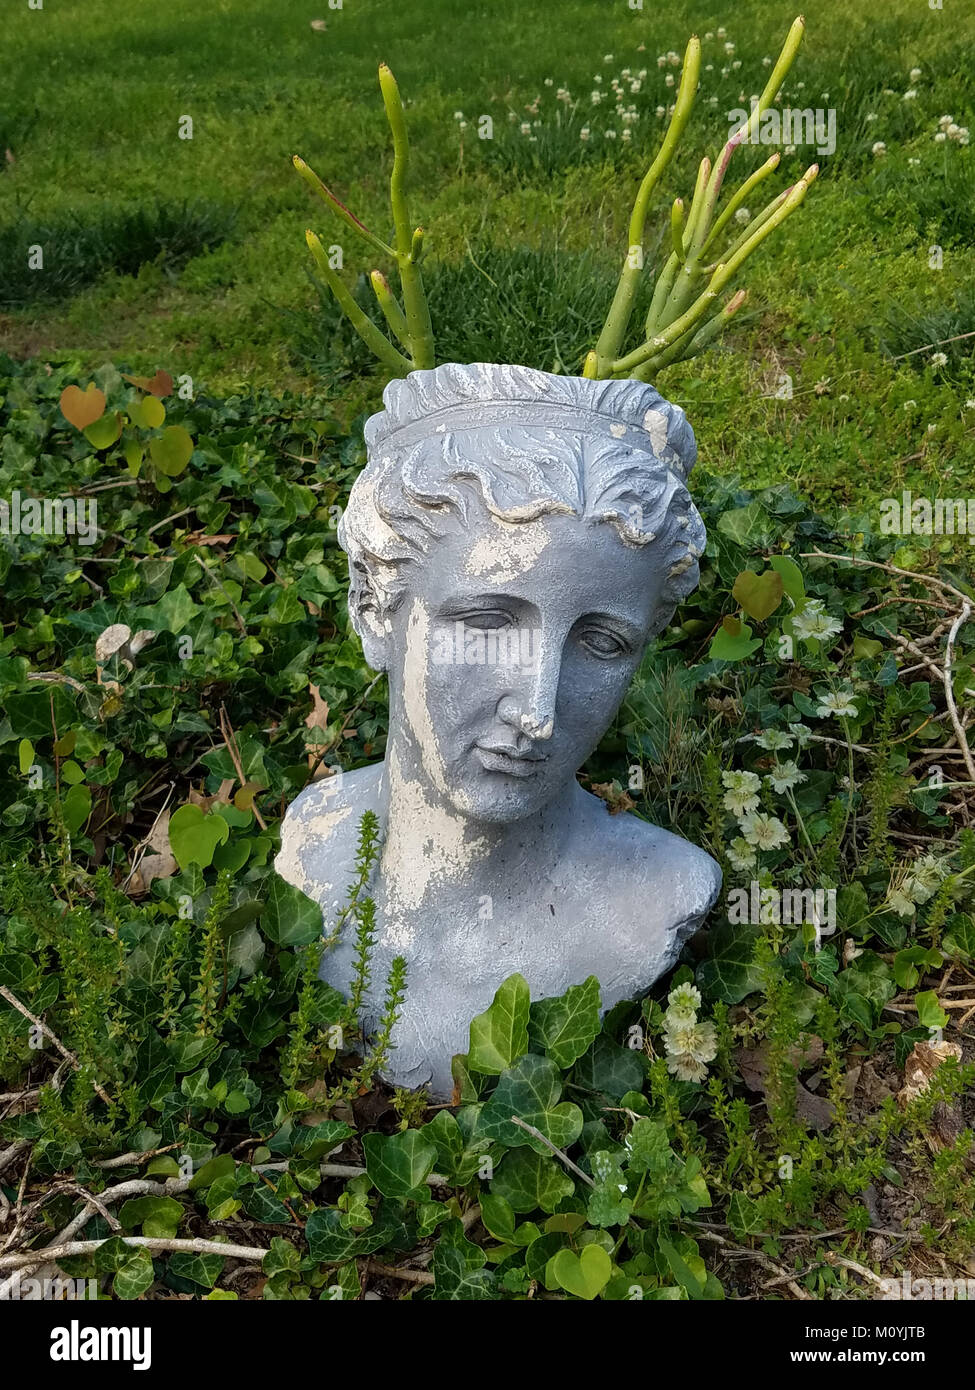 https://c8.alamy.com/comp/M0YJTB/roman-head-planter-with-cacti-growning-out-of-its-head-in-a-bed-of-M0YJTB.jpg